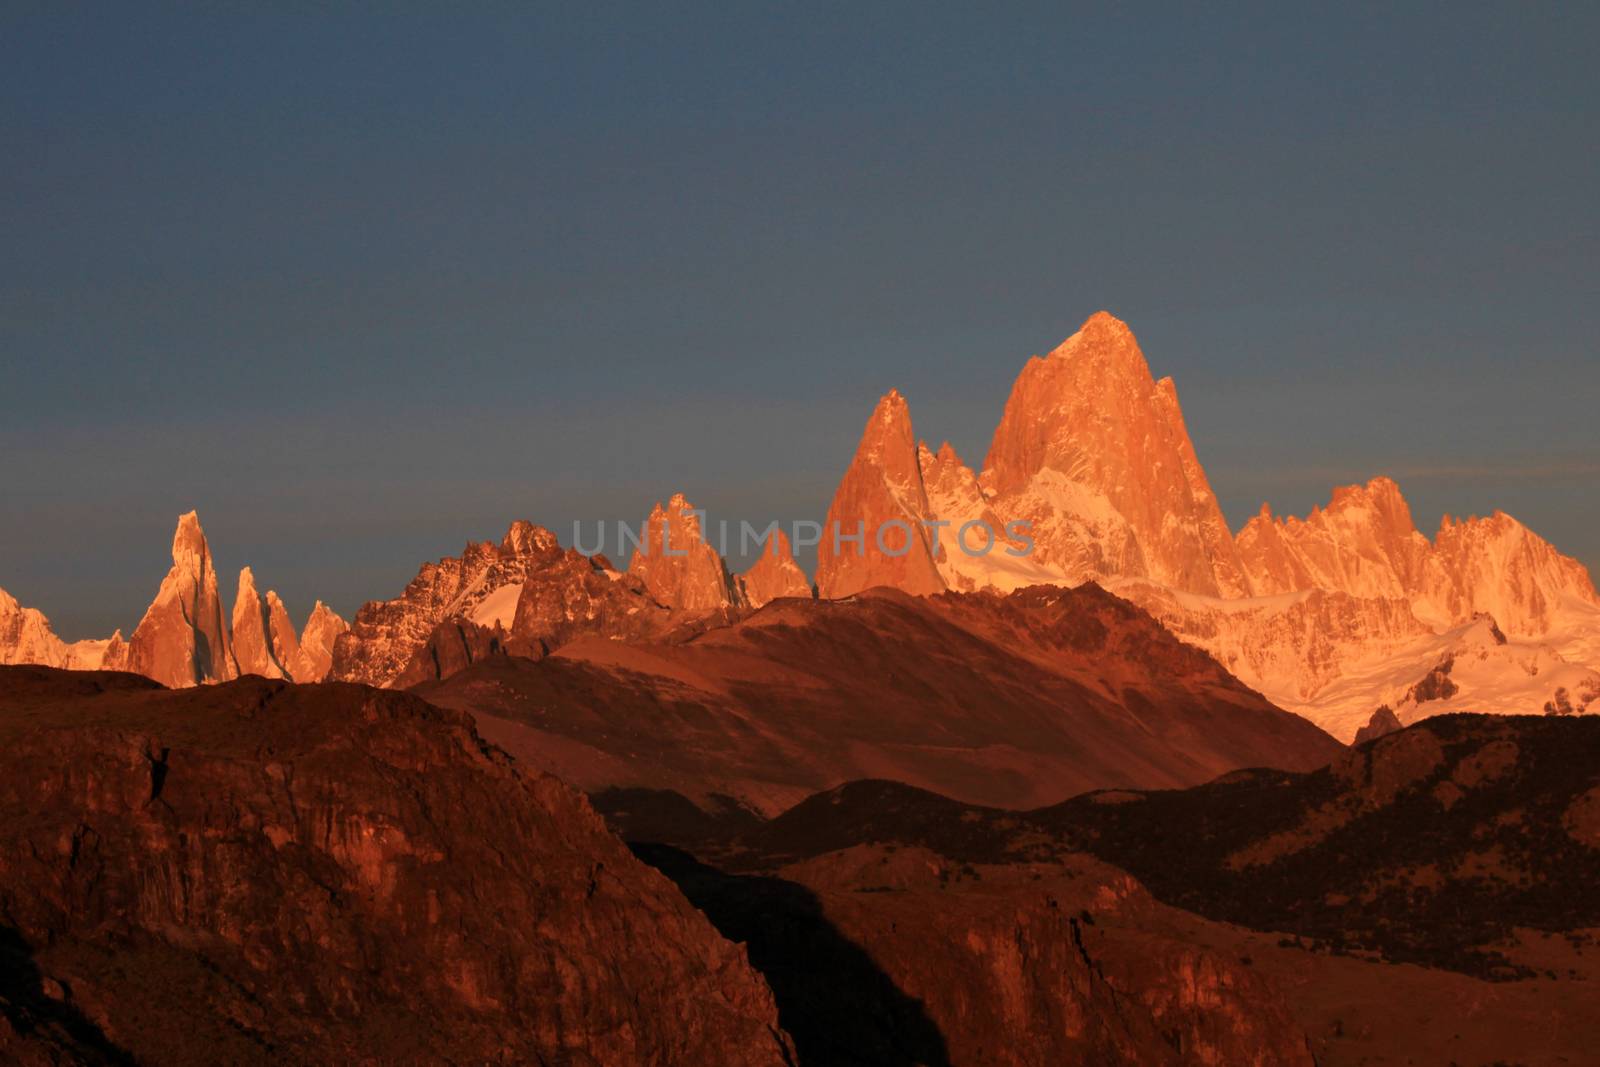 Fitz Roy and Cerro Torre mountainline at sunrise, Patagonia, Argentina by cicloco